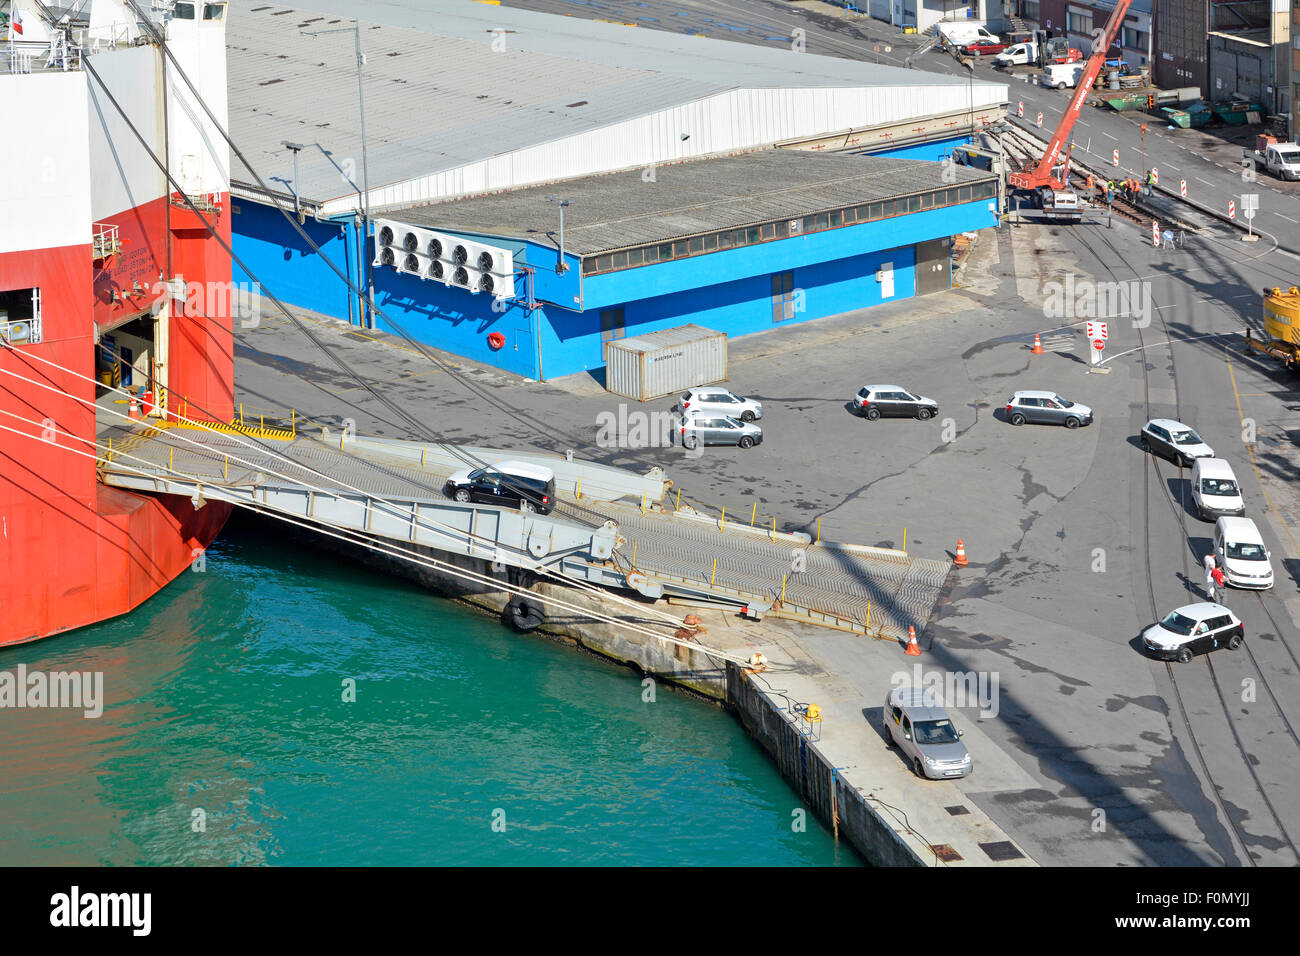 Aerial view looking down on Port of Koper new export cars being driven across dockside onto ramp to car carrier ship named Le Mans Express in Slovenia Stock Photo